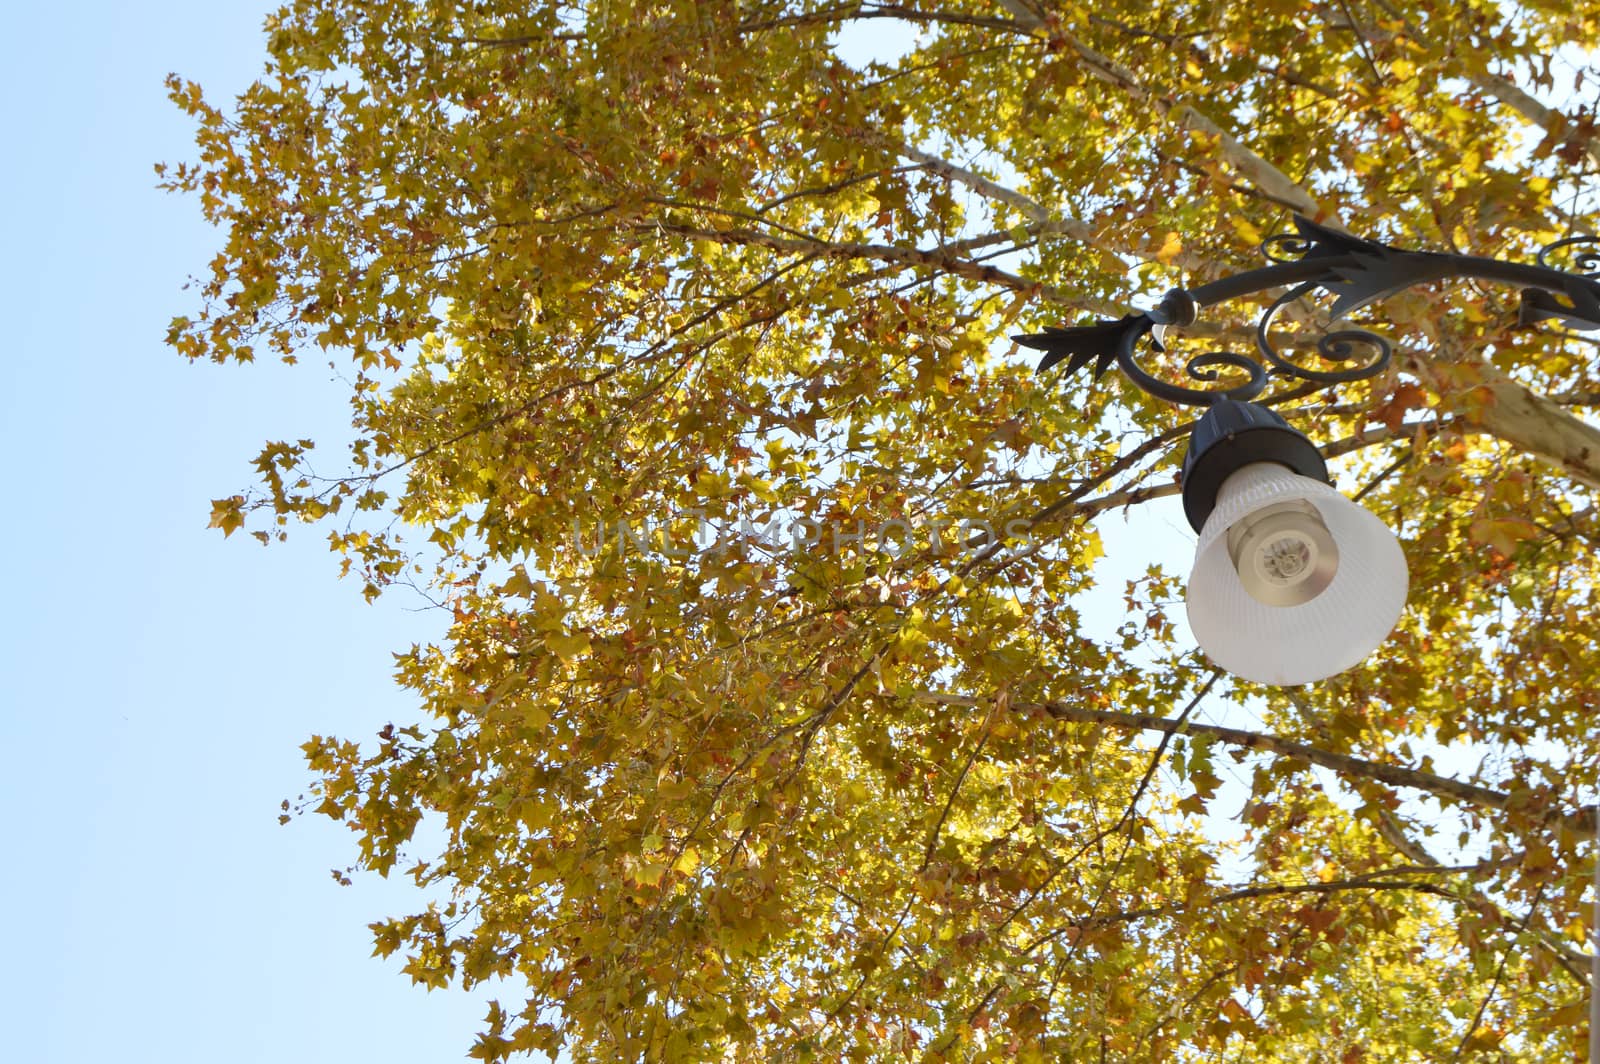 Vintage lantern on the background of yellow foliage and blue sky, autumn landscape in the garden by claire_lucia